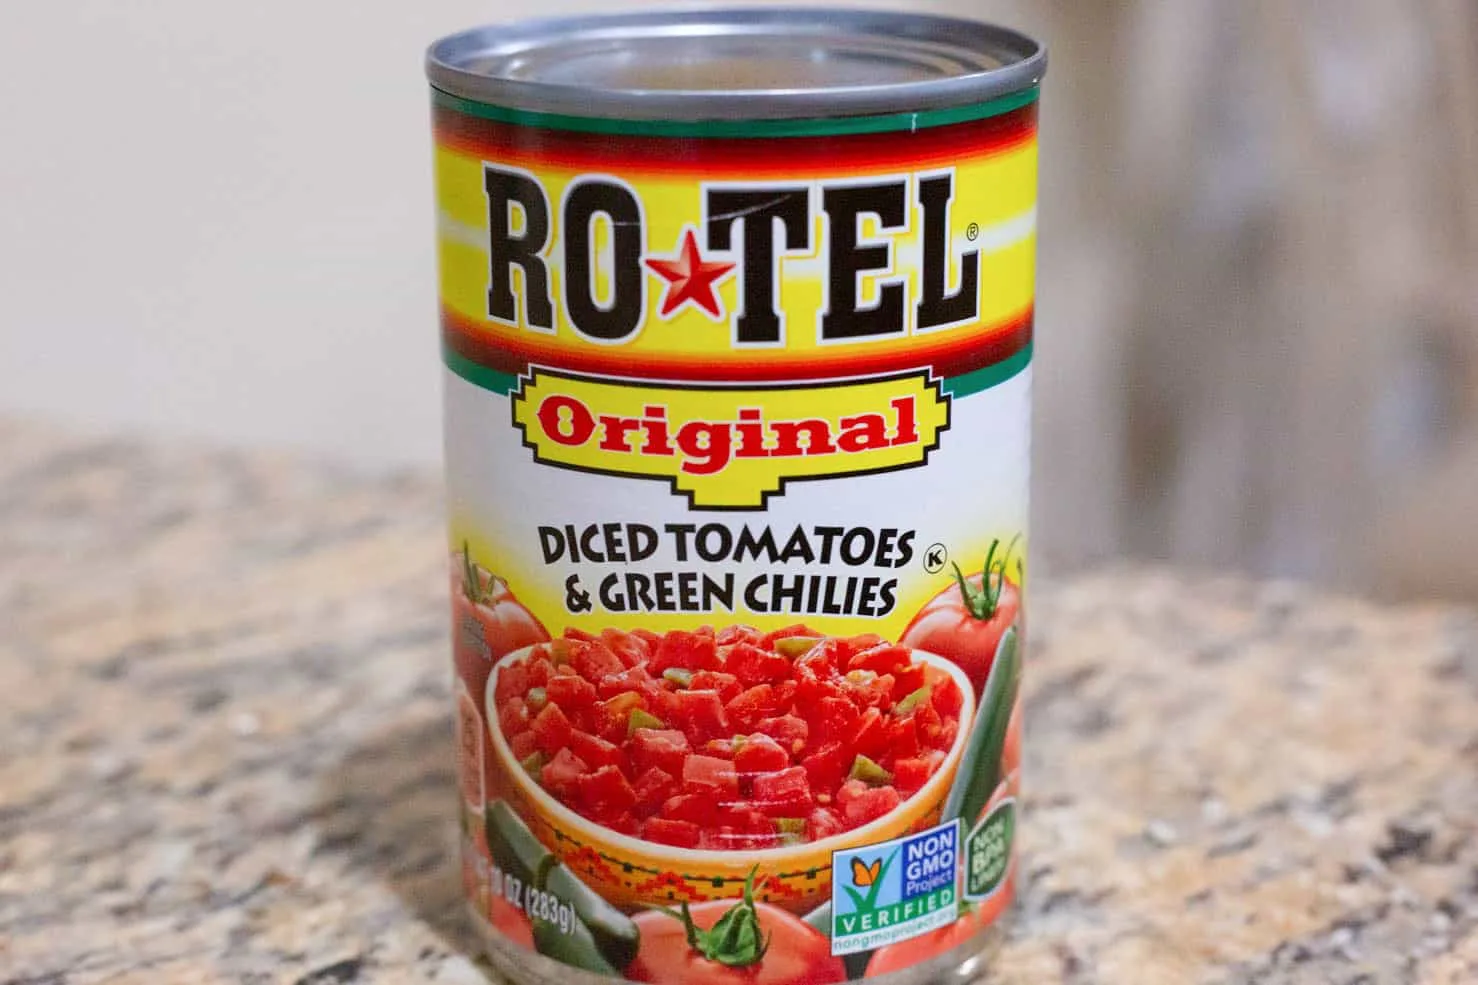 A colorful can of Rotel diced tomatoes and green chiles.